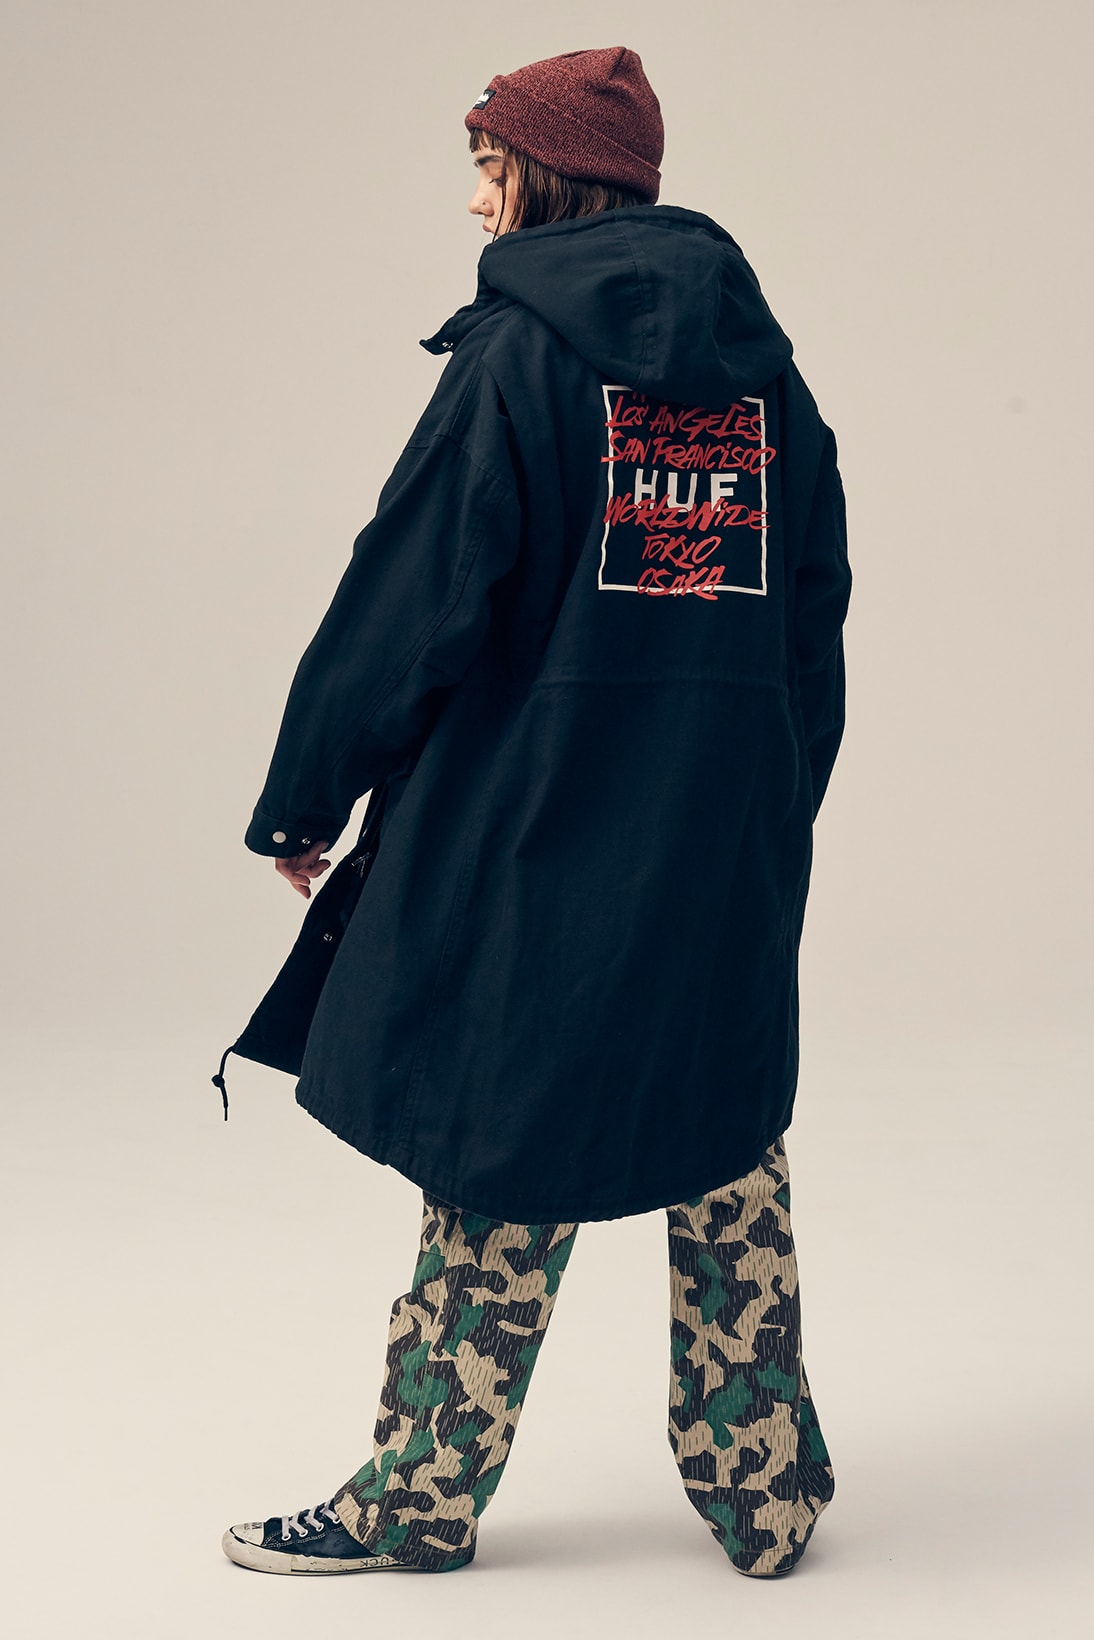 huf womens collection fall lookbook denim jackets coats jumpsuits sweaters skirts pants clothes fashion 